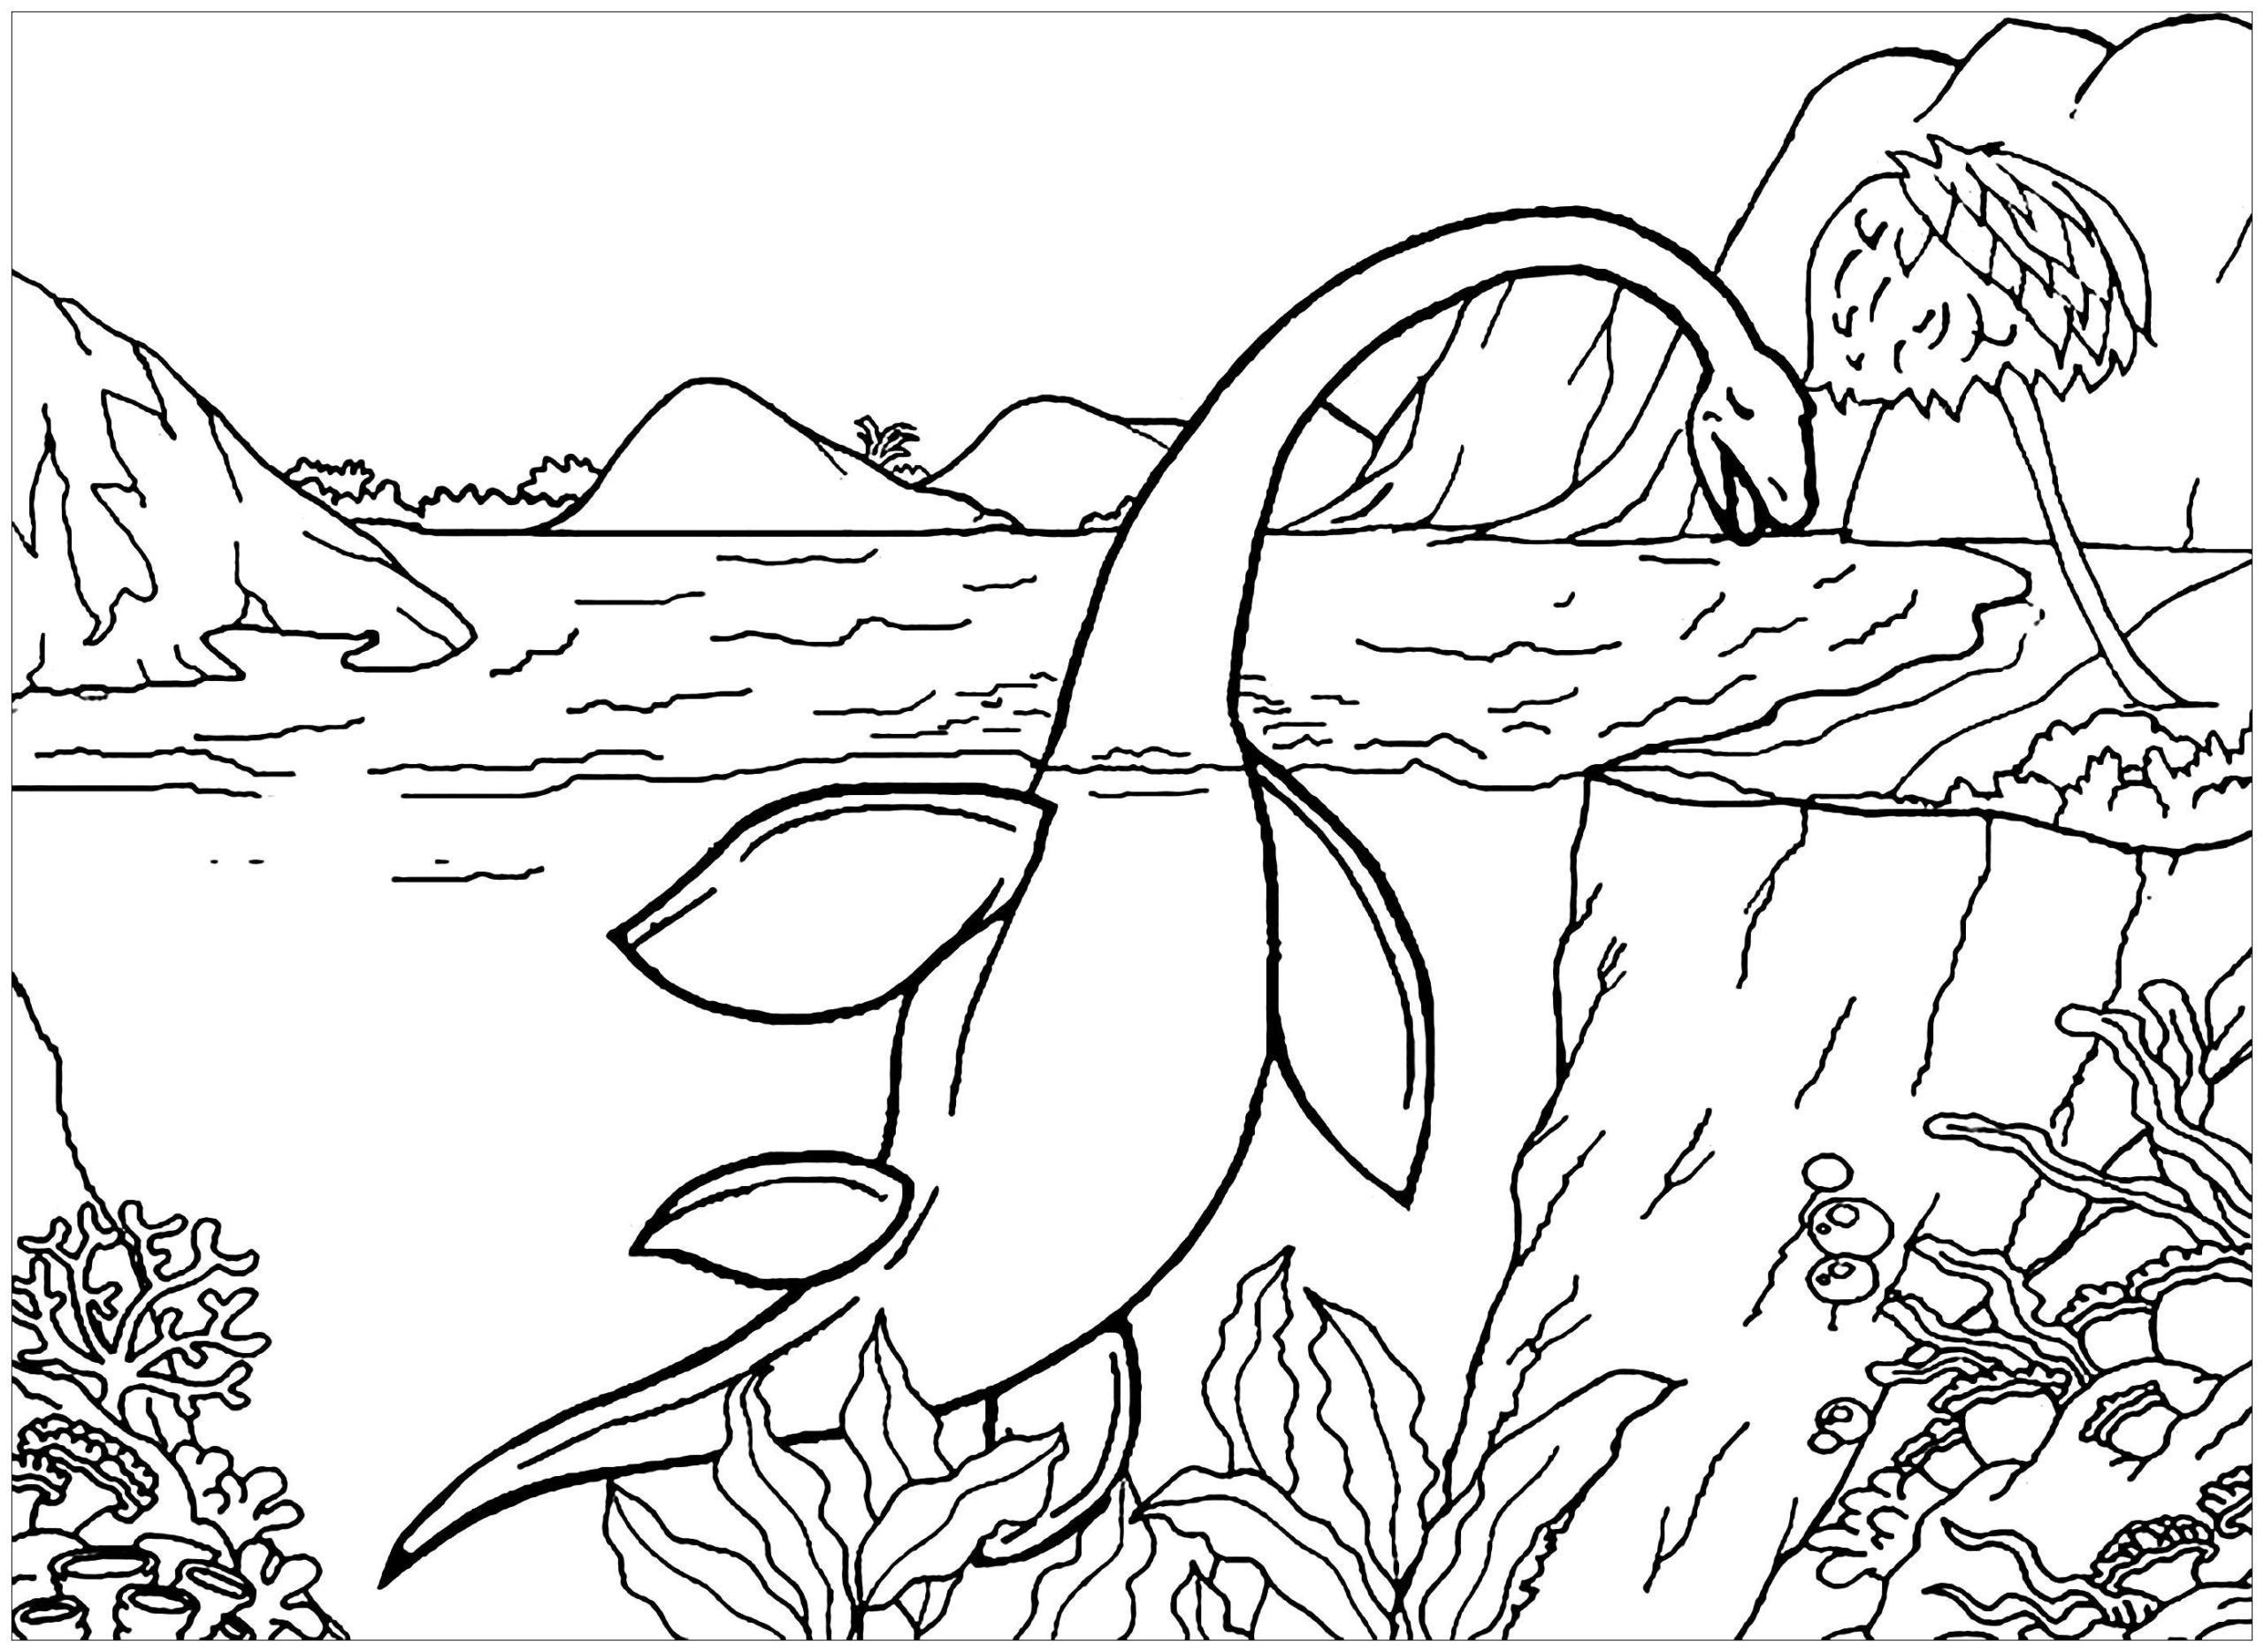 60 Printable Dinosaur Coloring Pages Free 31